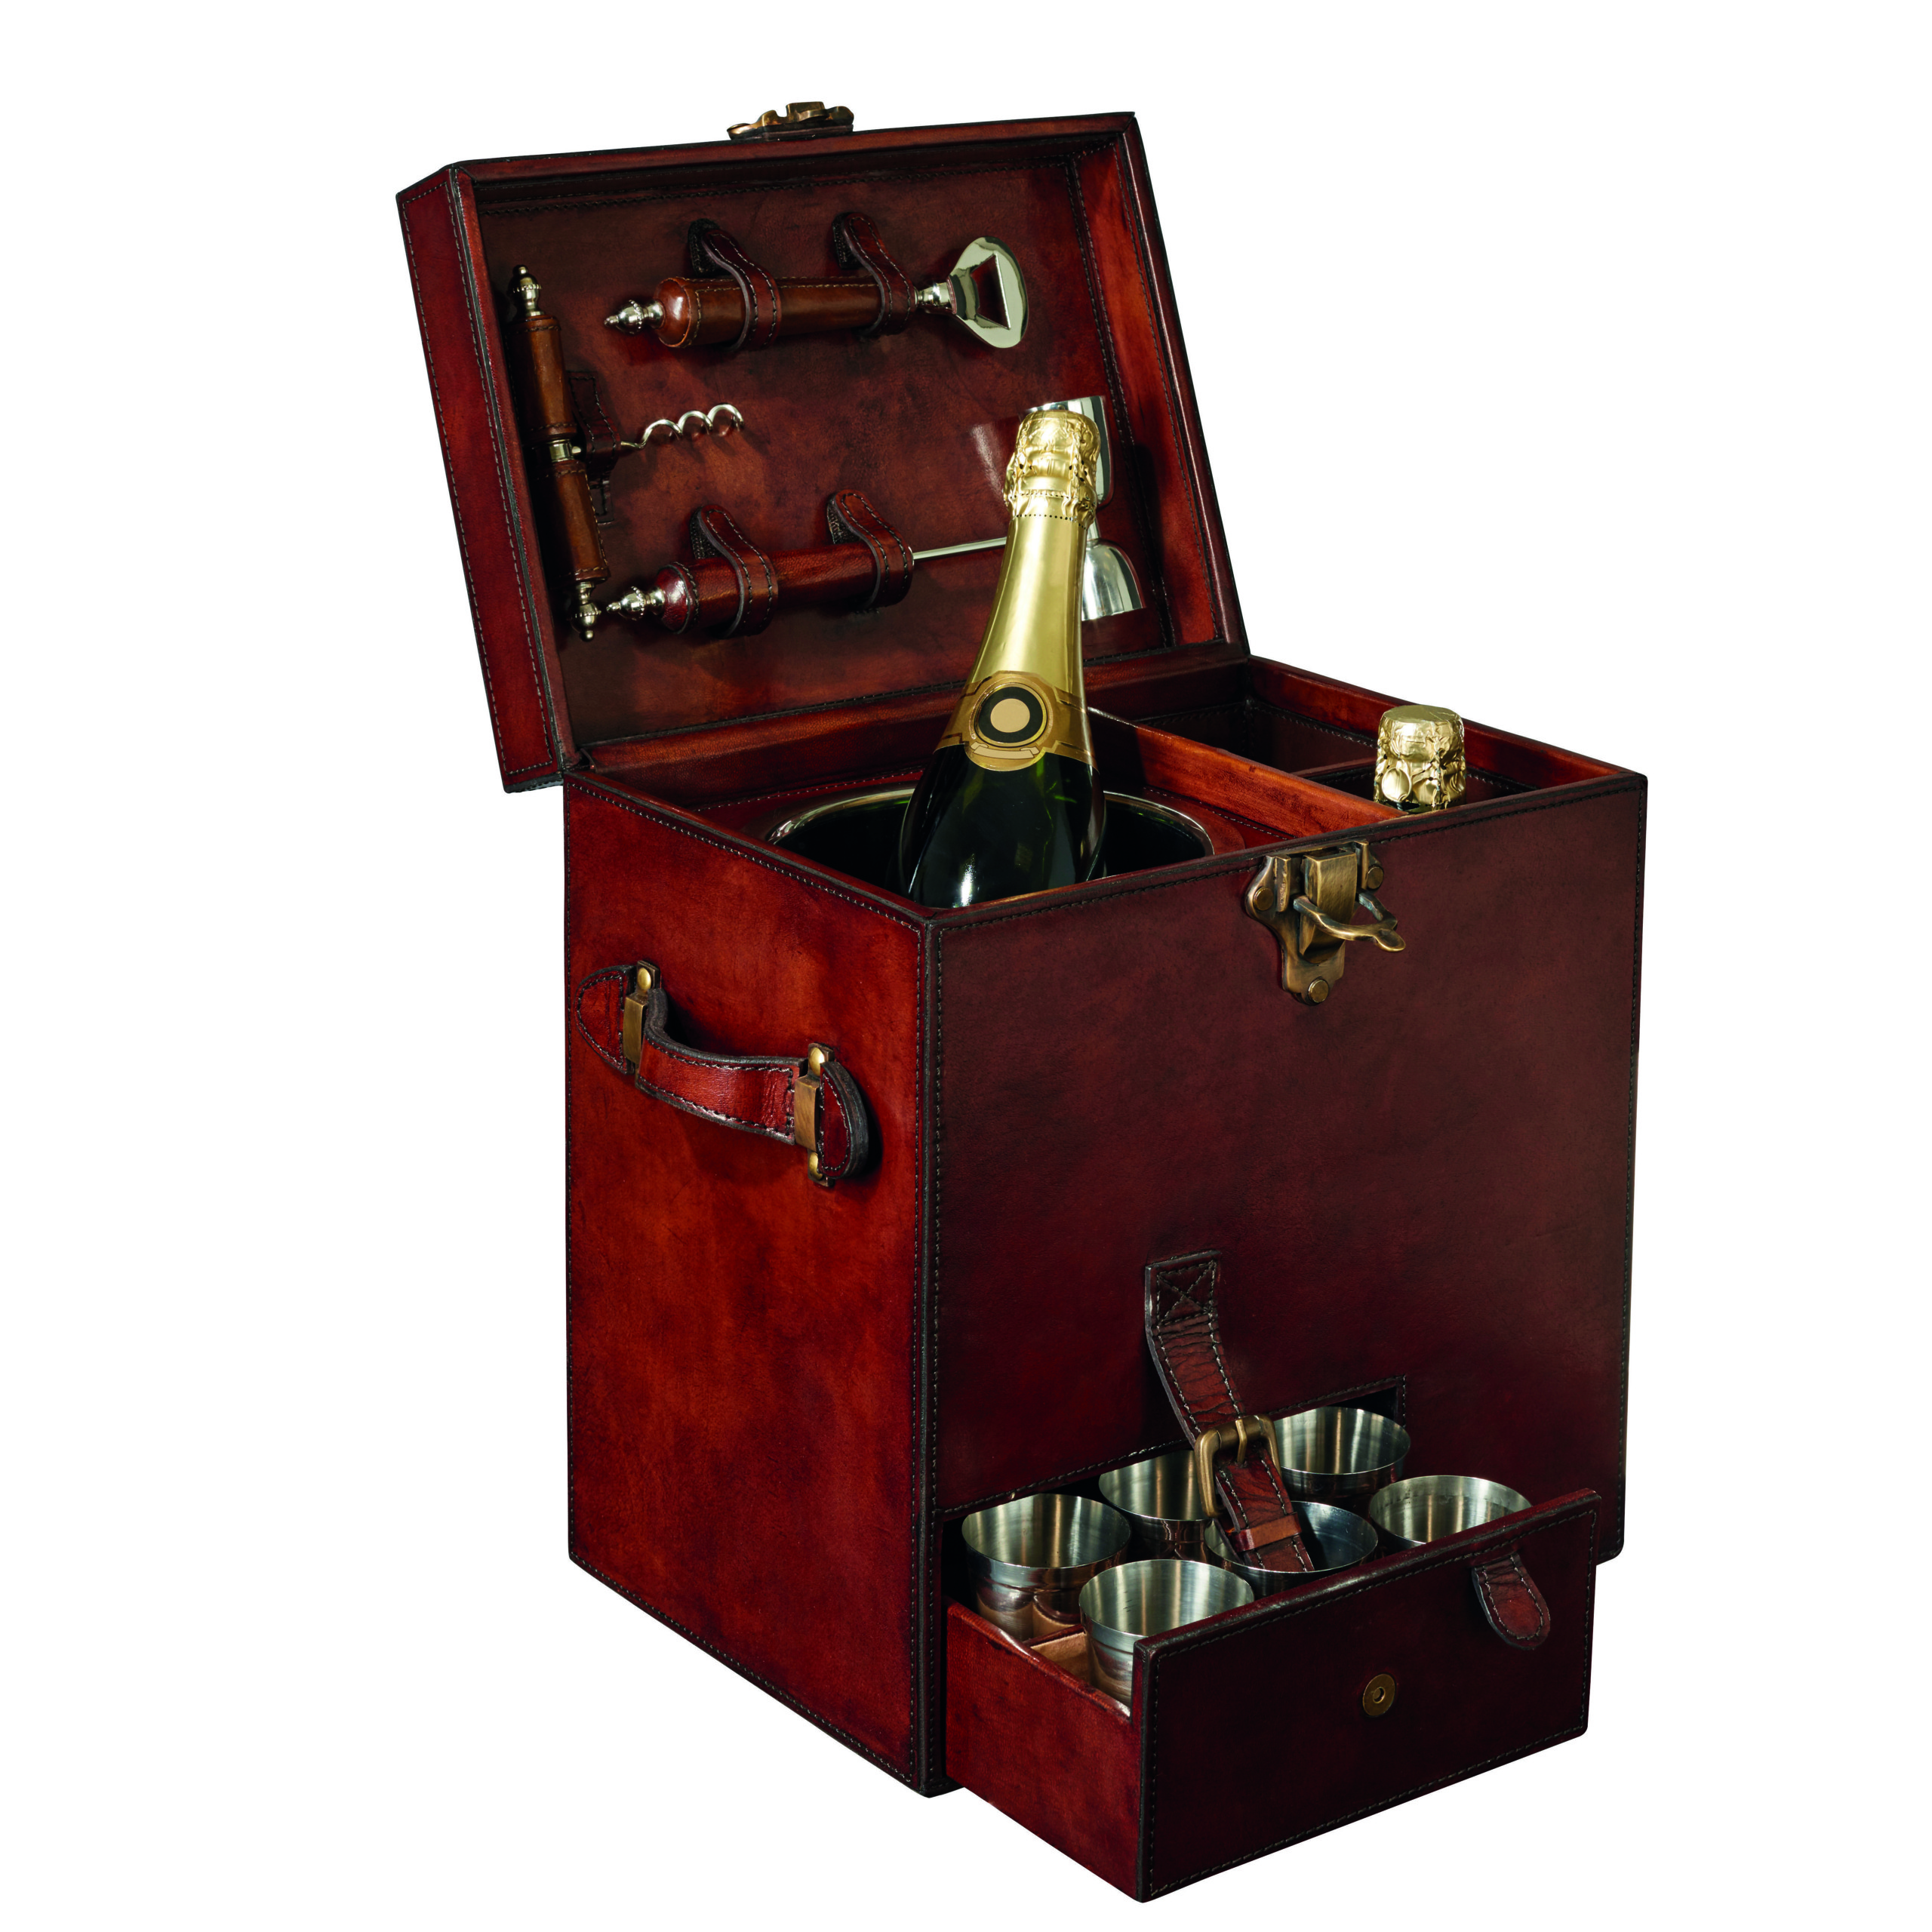 A portable vintage leather mini bar equipped with all your